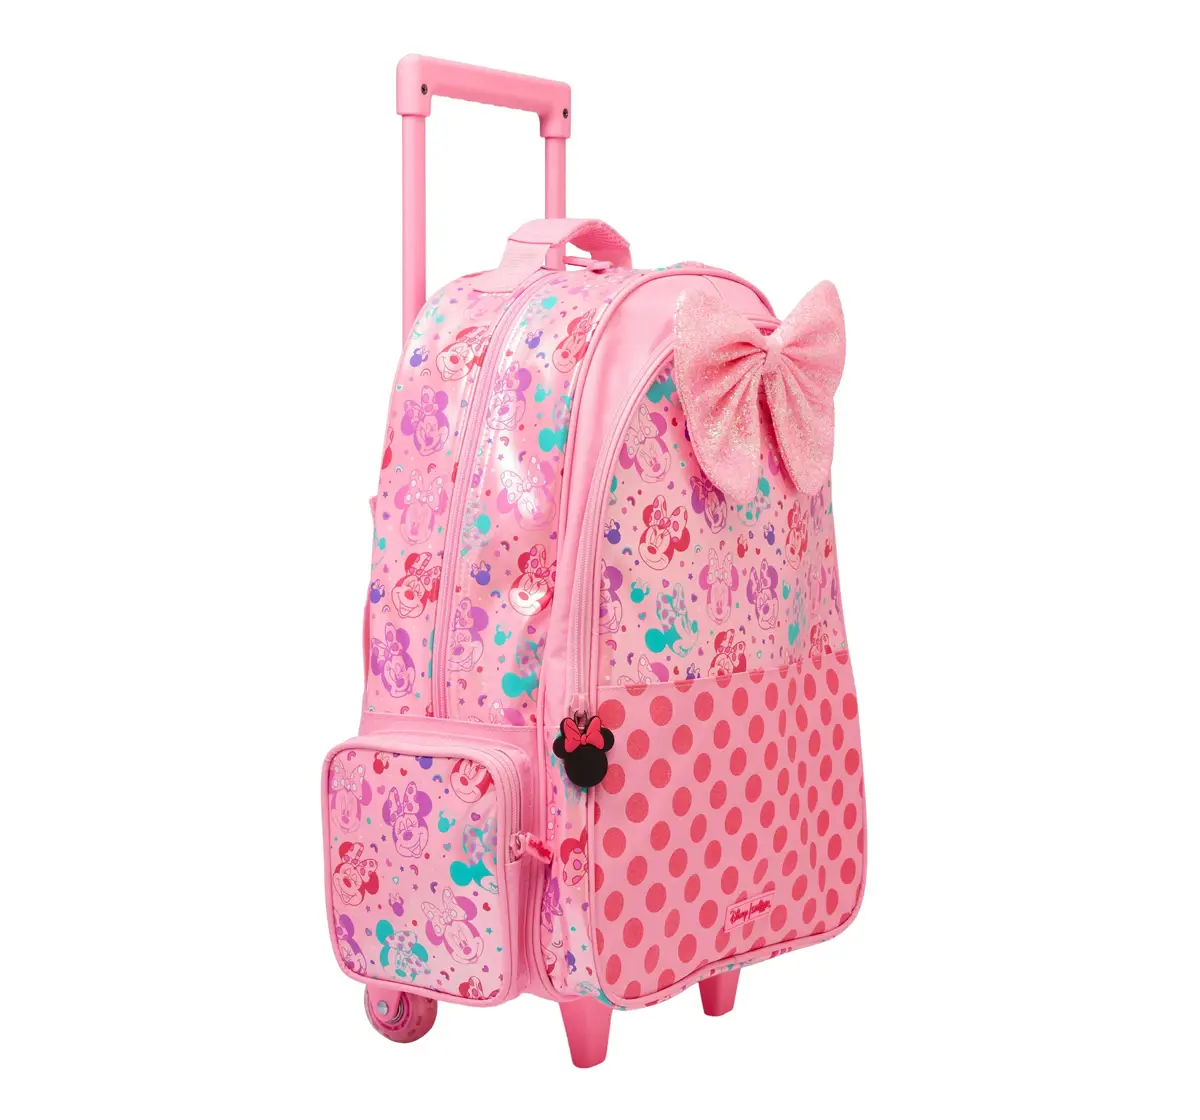 Smiggle Minnie Mouse Trolley Bag With Light Up Wheels, Pink, 3Y+